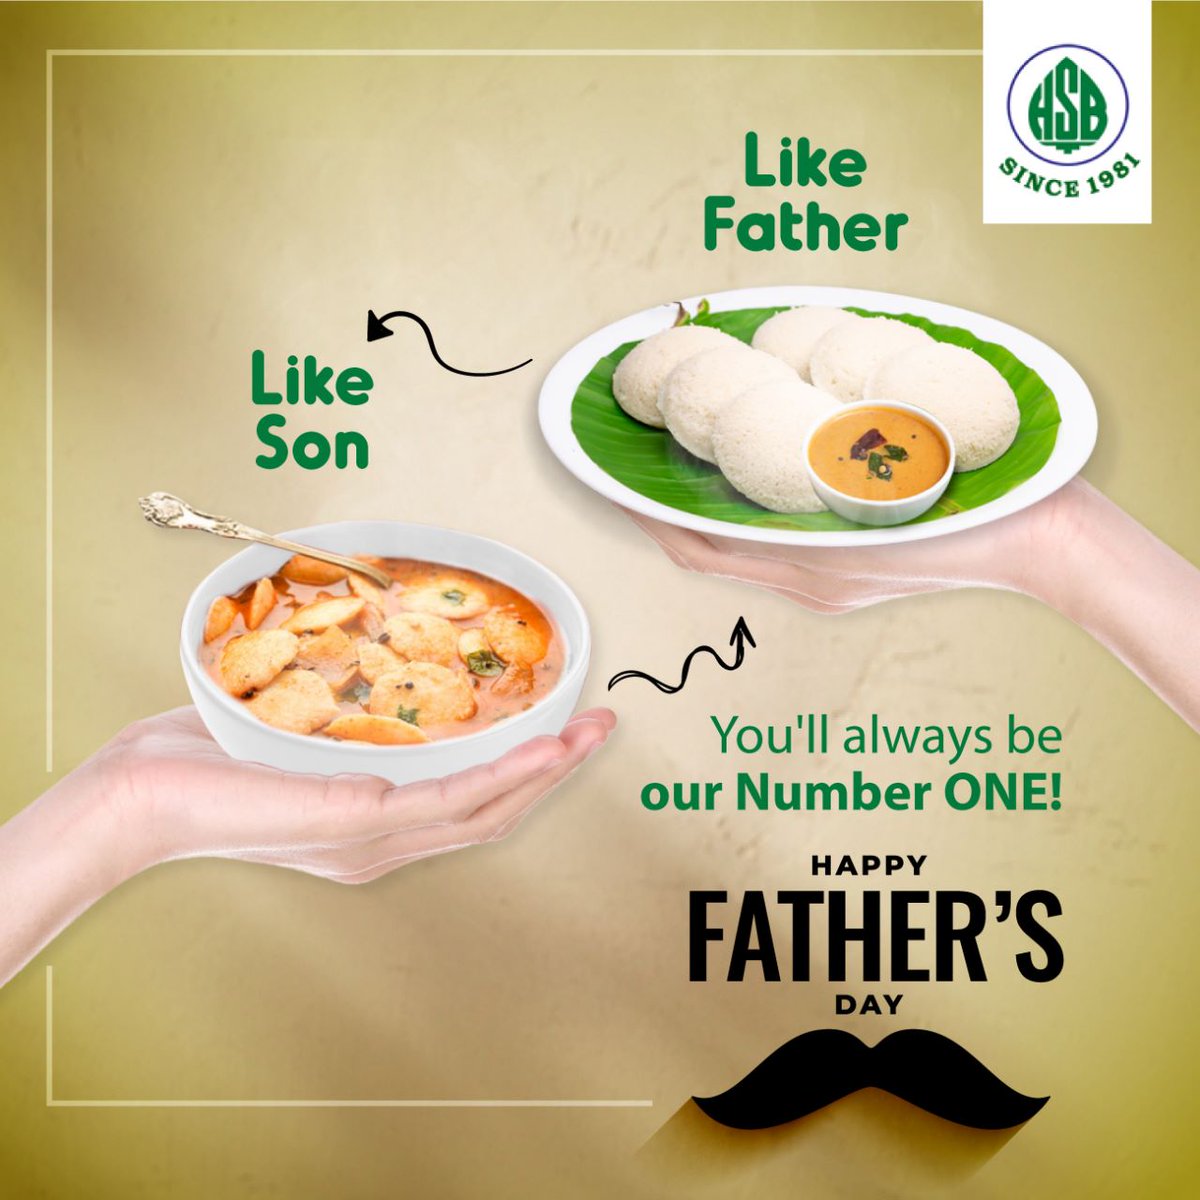 Enjoy unlimited delicacies with your Number 1 on Father's Day, only at Hotel Saravana Bhavan
#HotelSaravanaBhavan #specialday #qualityfood #tastyfood #deliciousmeals #HappyFathersDay